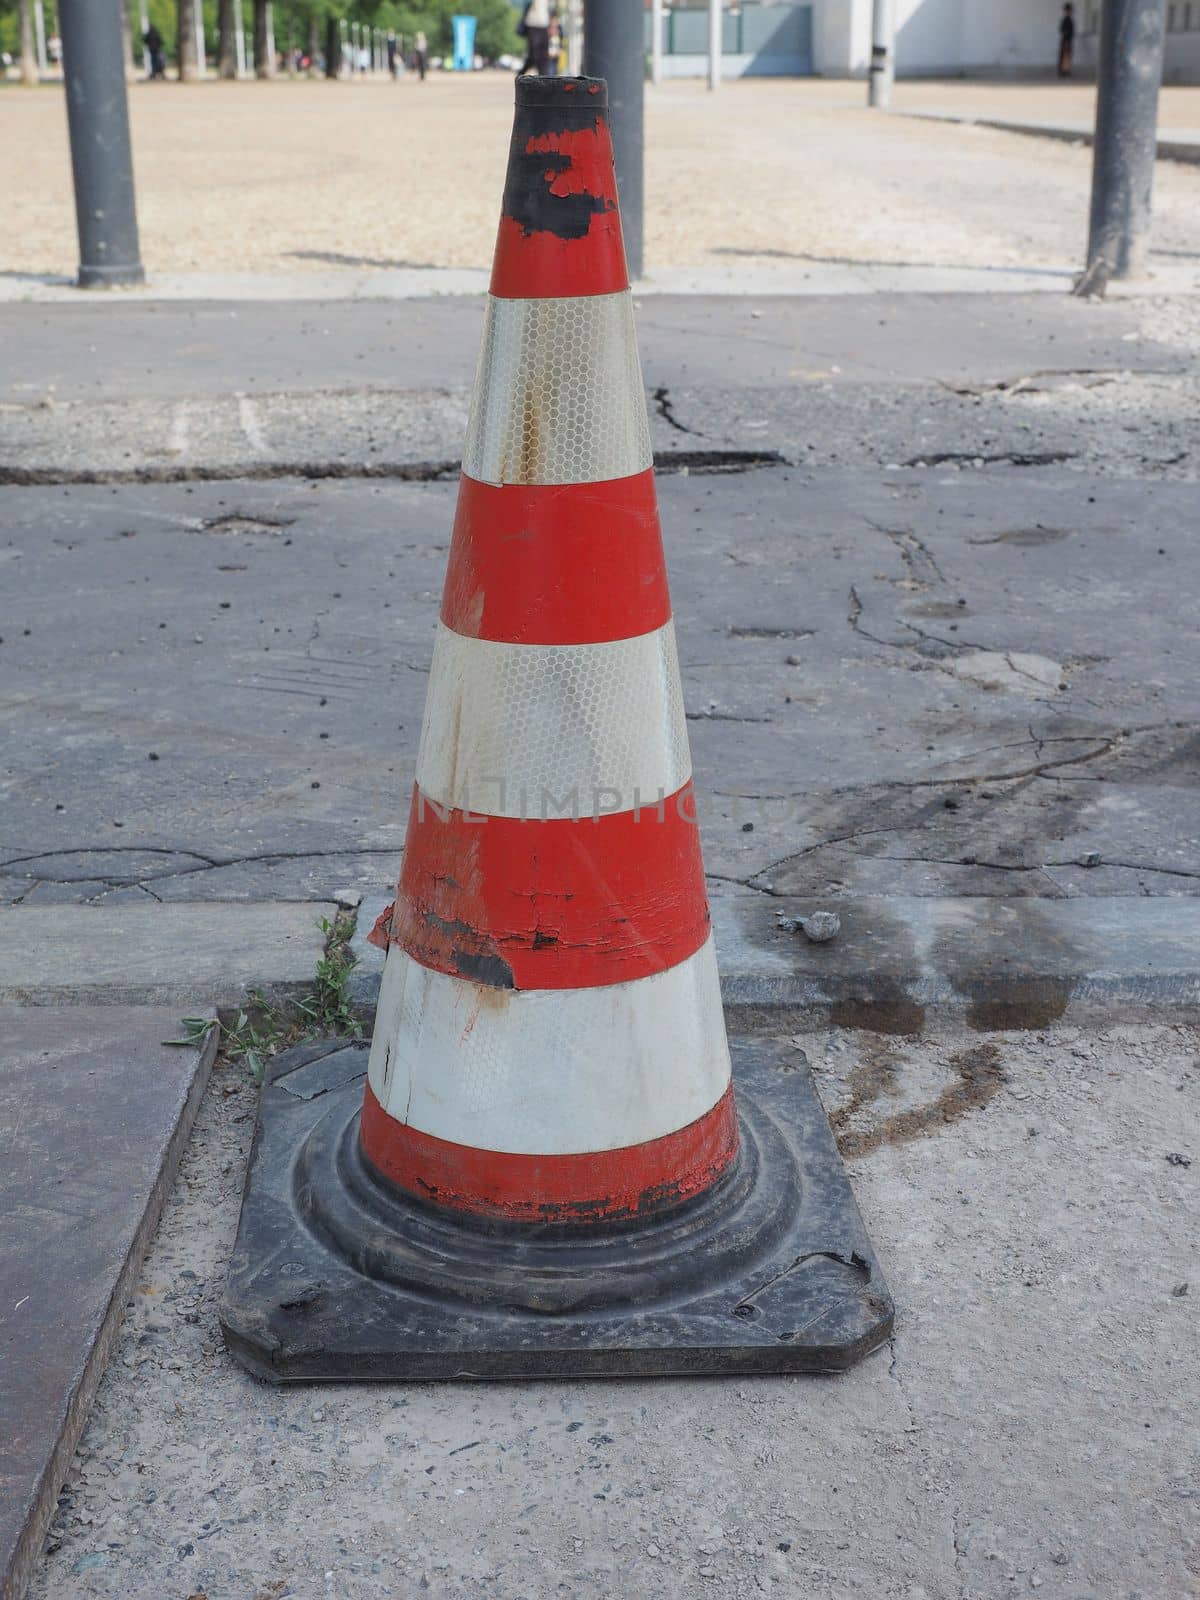 traffic cone to mark road works or temporary obstruction traffic sign